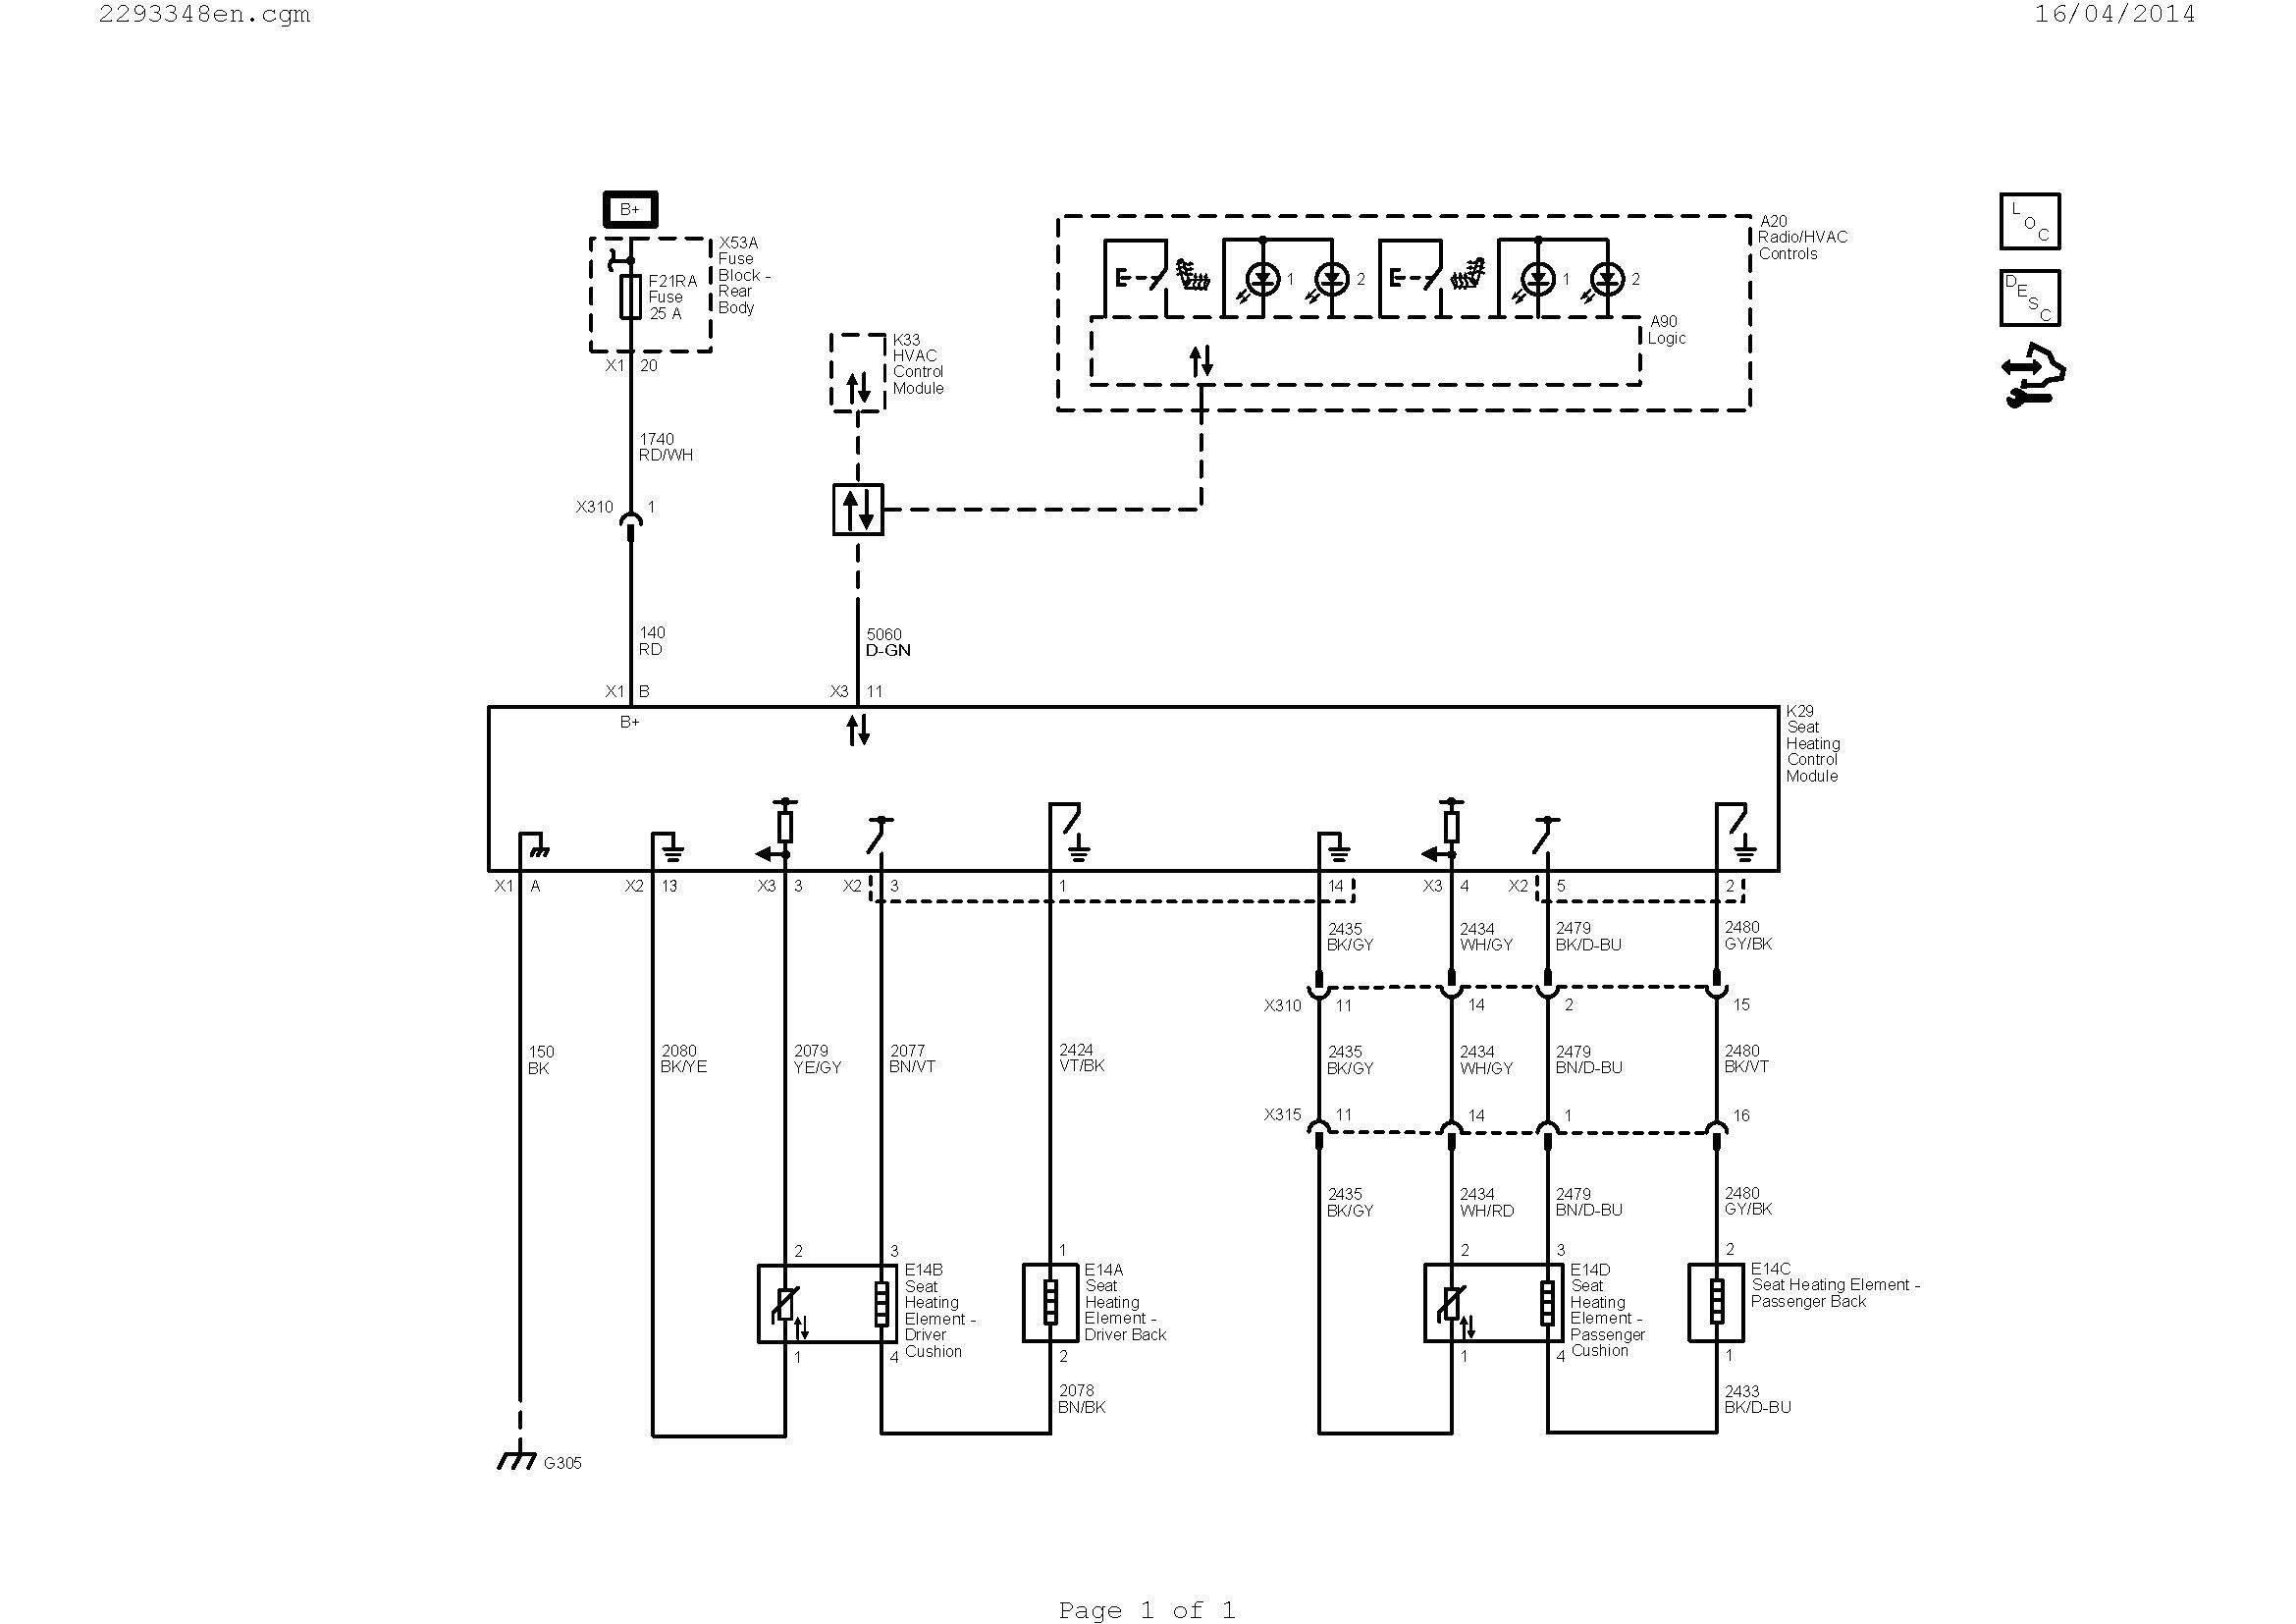 hks fcd wiring diagram awesome furnace wiring diagram collection